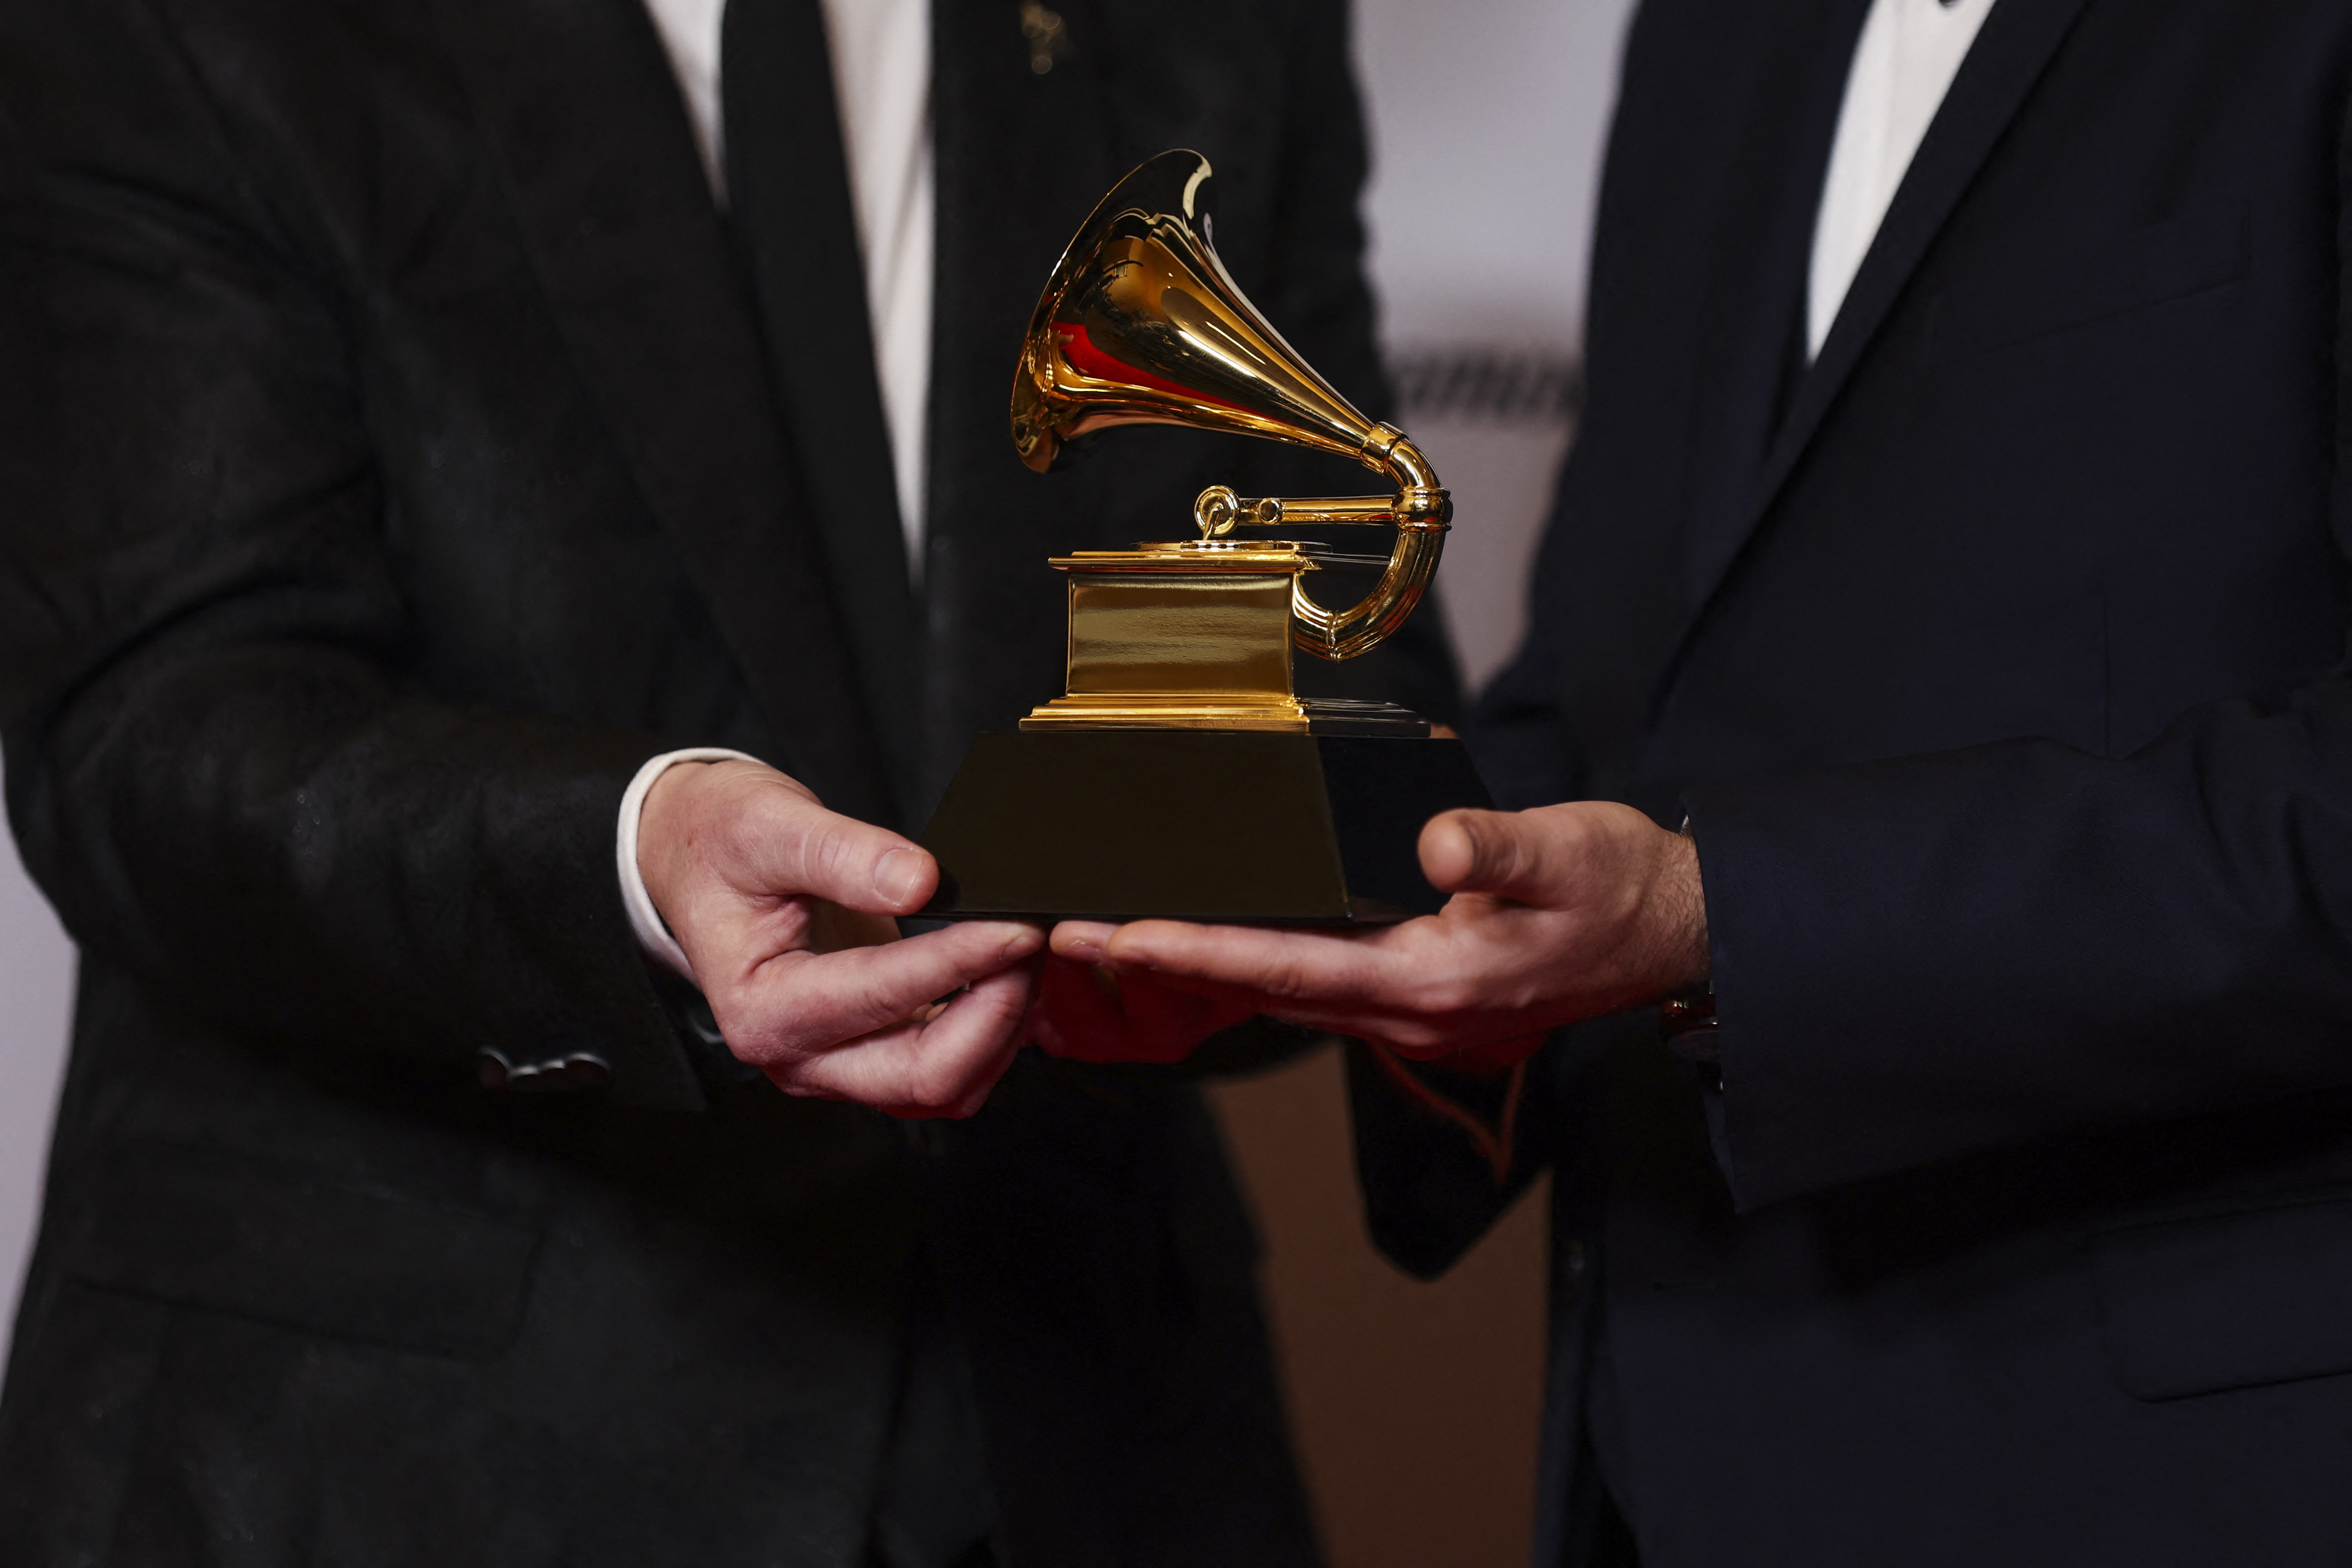 Michael Romanowski and Charlie Post pose with the Grammy for Best Classical Engineered Album for "Bates: Philharmonia Fantastique - The Making Of The Orchestra" during the Premiere Ceremony of the 65th Annual Grammy Awards in Los Angeles, California, U.S., February 5, 2023. REUTERS/Mike Blake